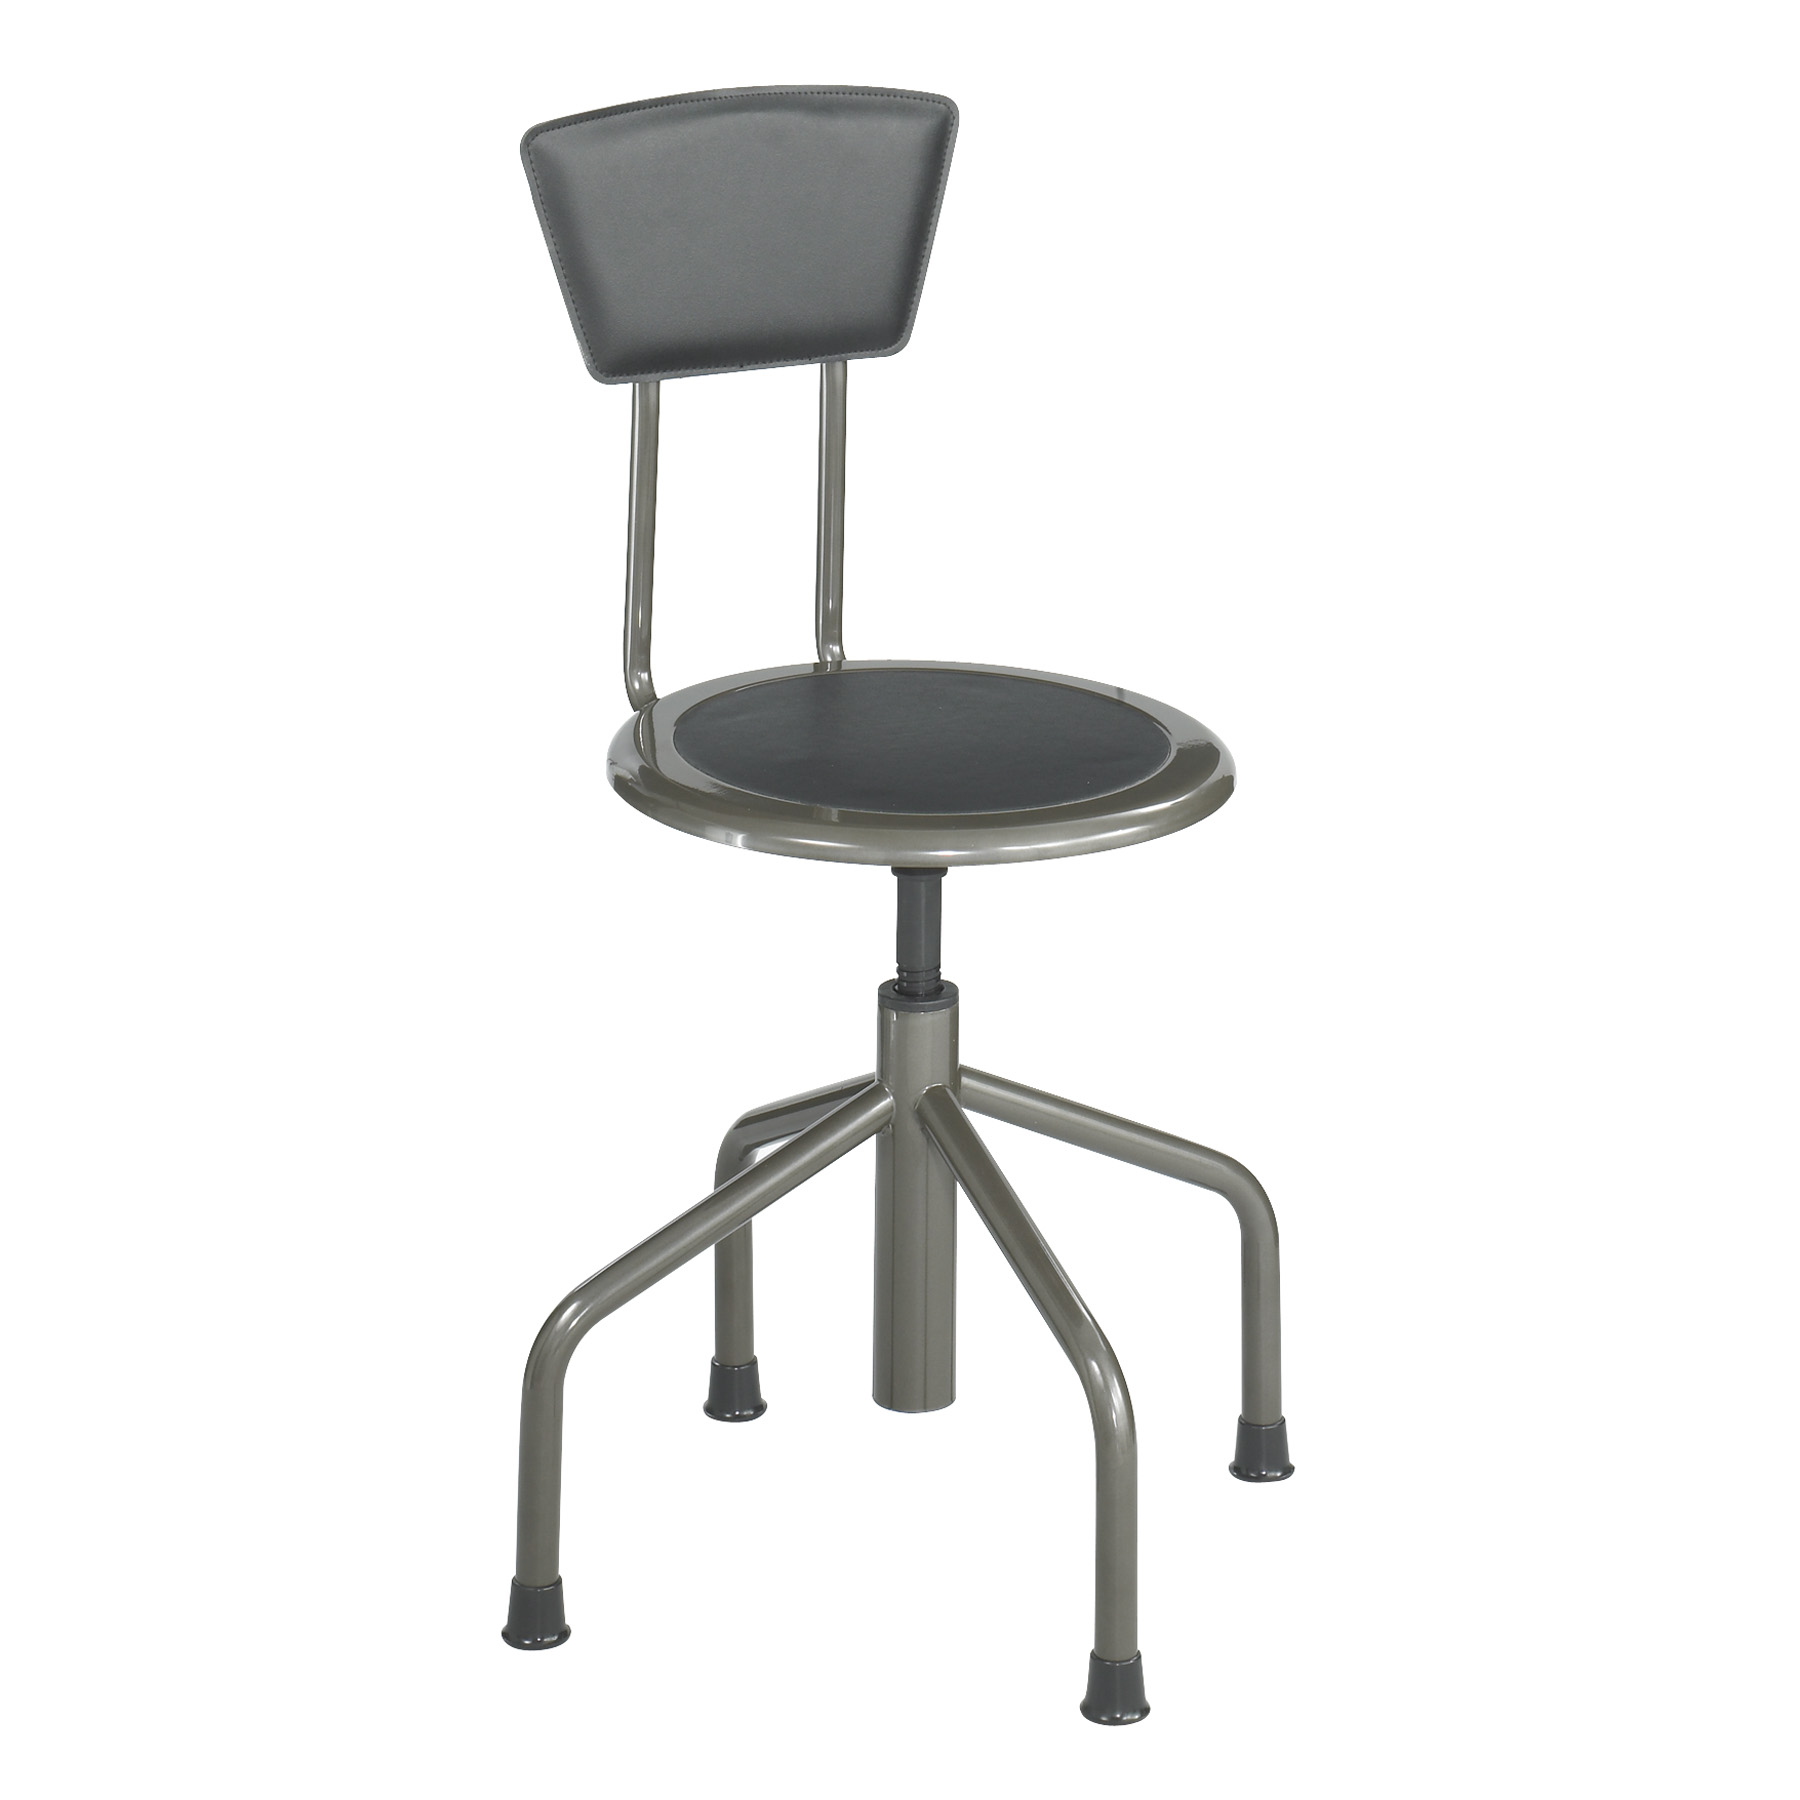 Safco Diesel Low Base Stool Without Back 6669 for sale online